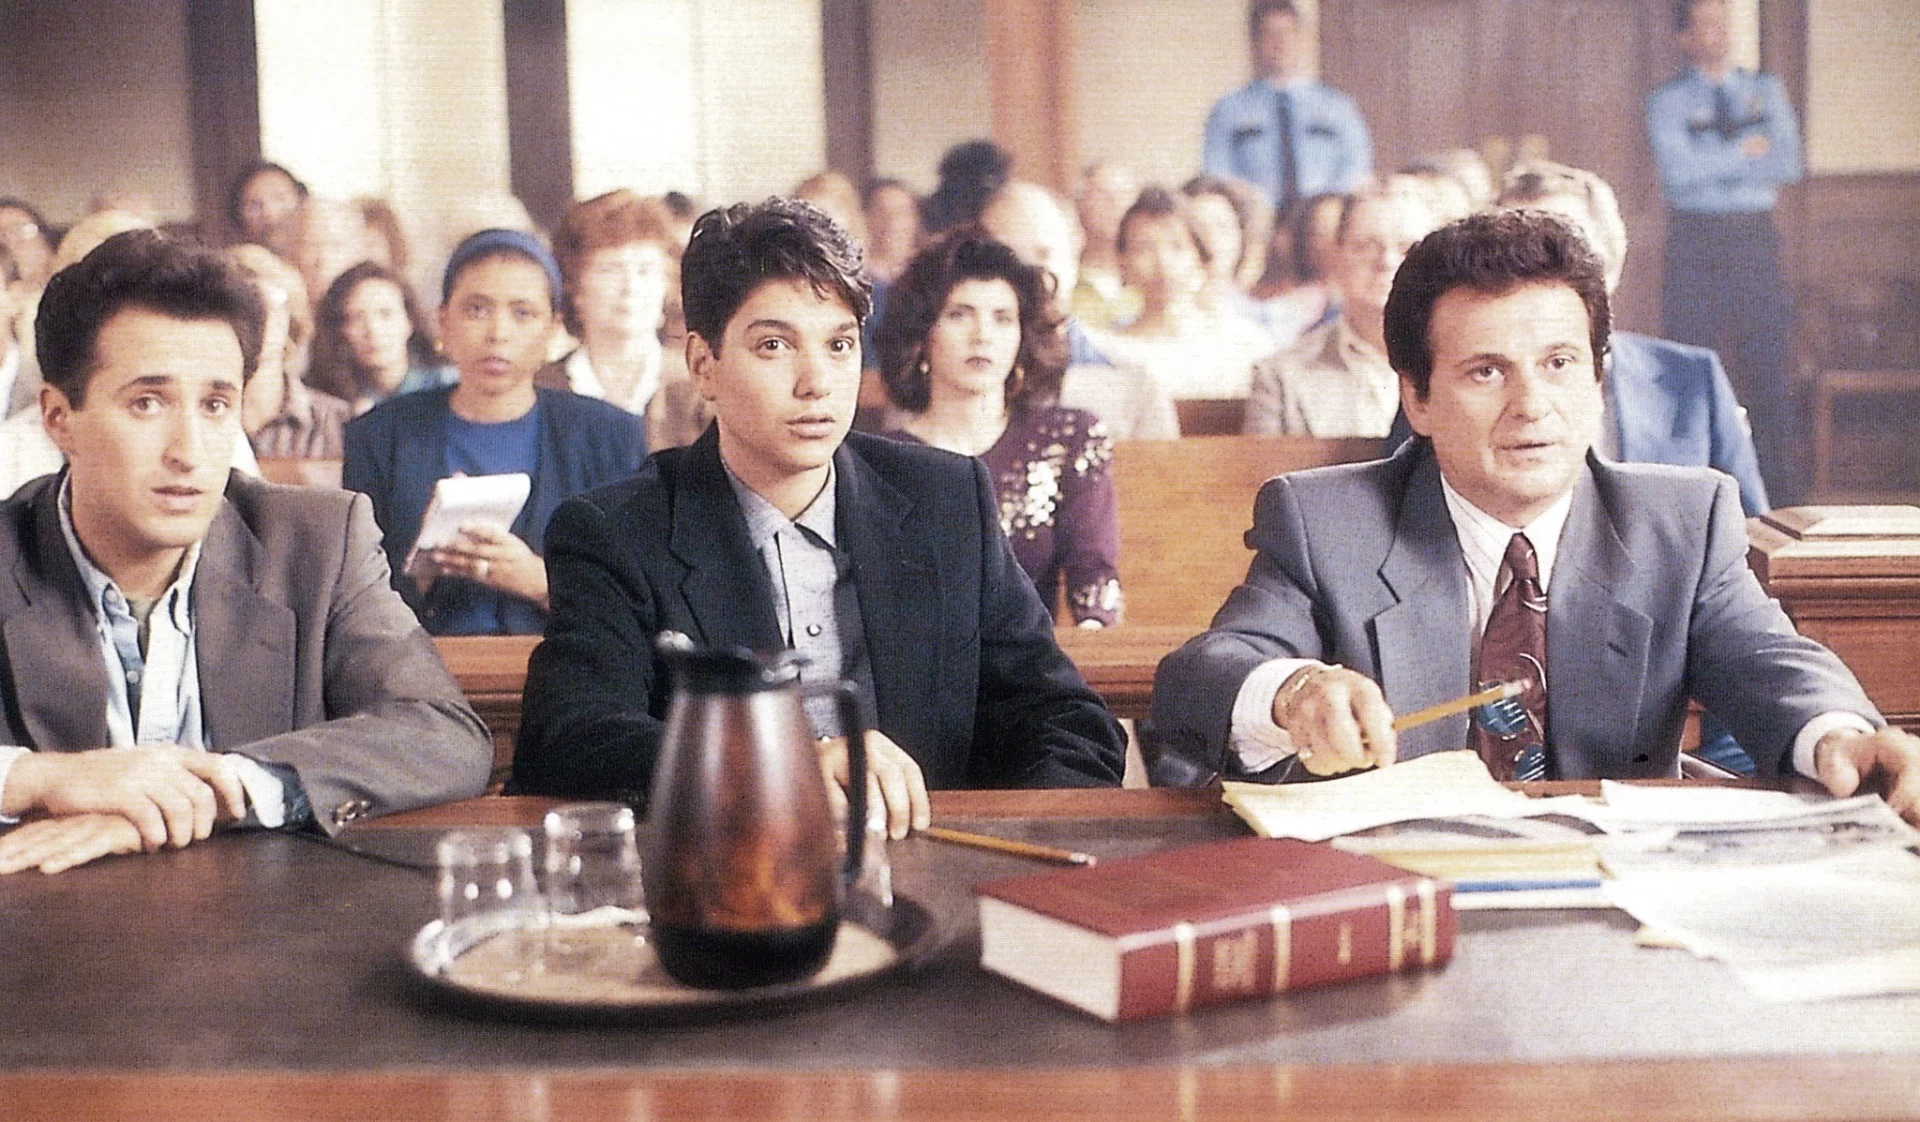 Top Trial Movies of the 1990s, Ranked - My Cousin Vinny (1992)